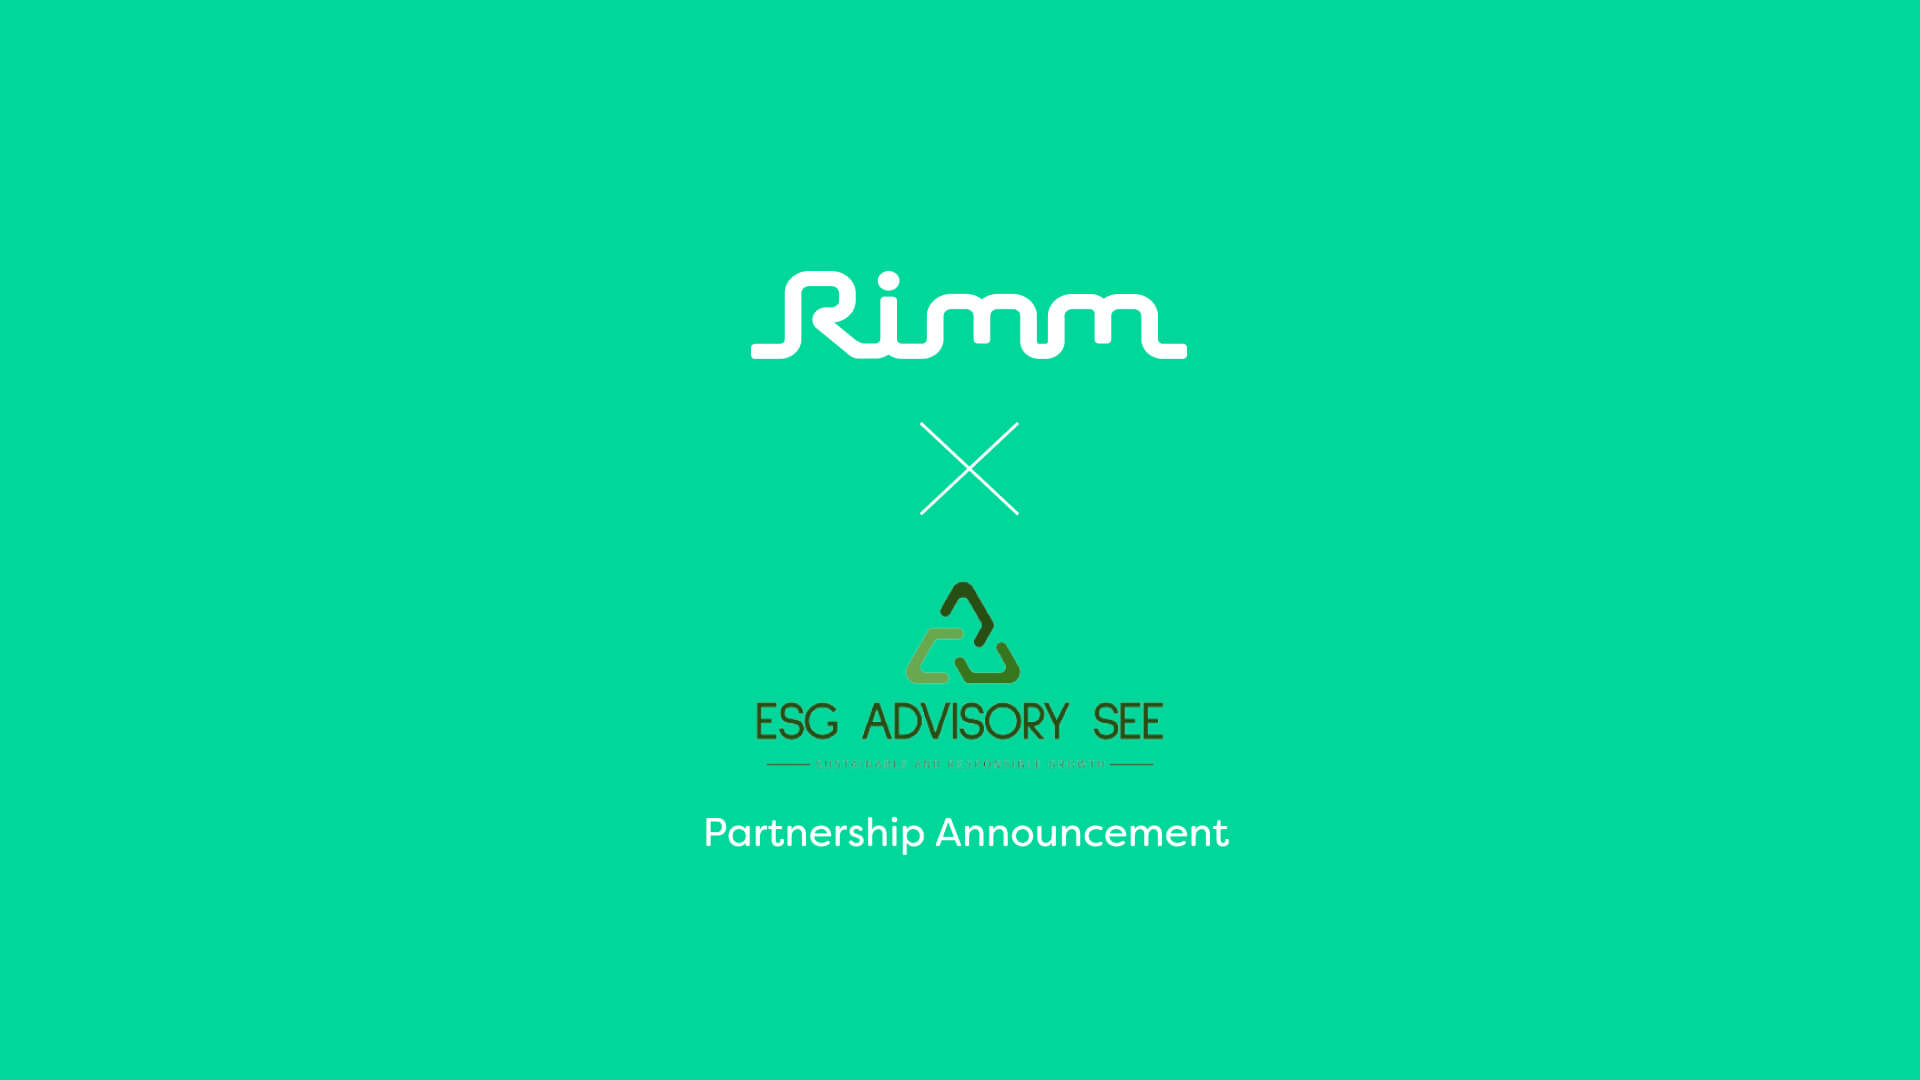 Rimm and ESG Advisory SEE Partnership Announcement